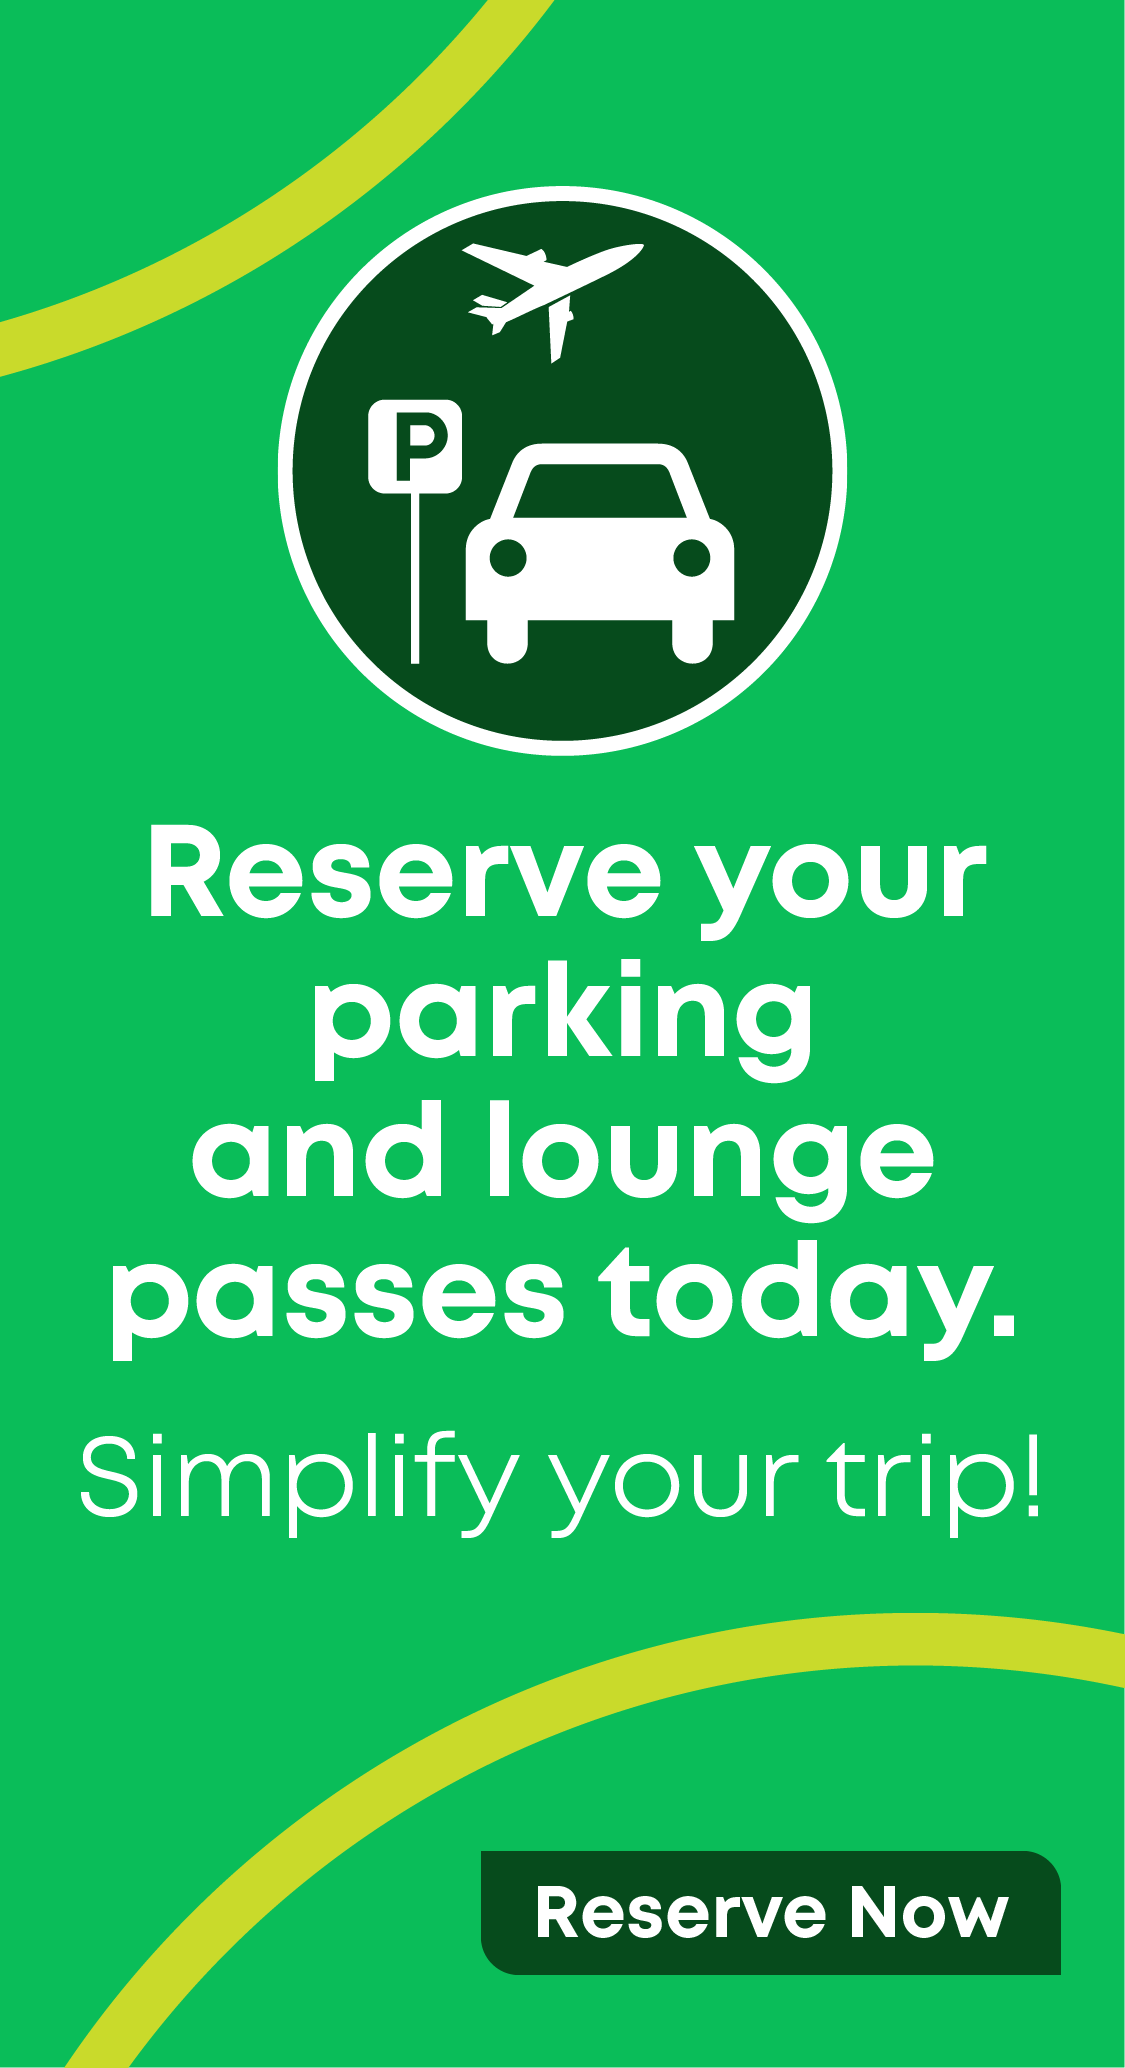 Pre-book your parking and lounge passes today.